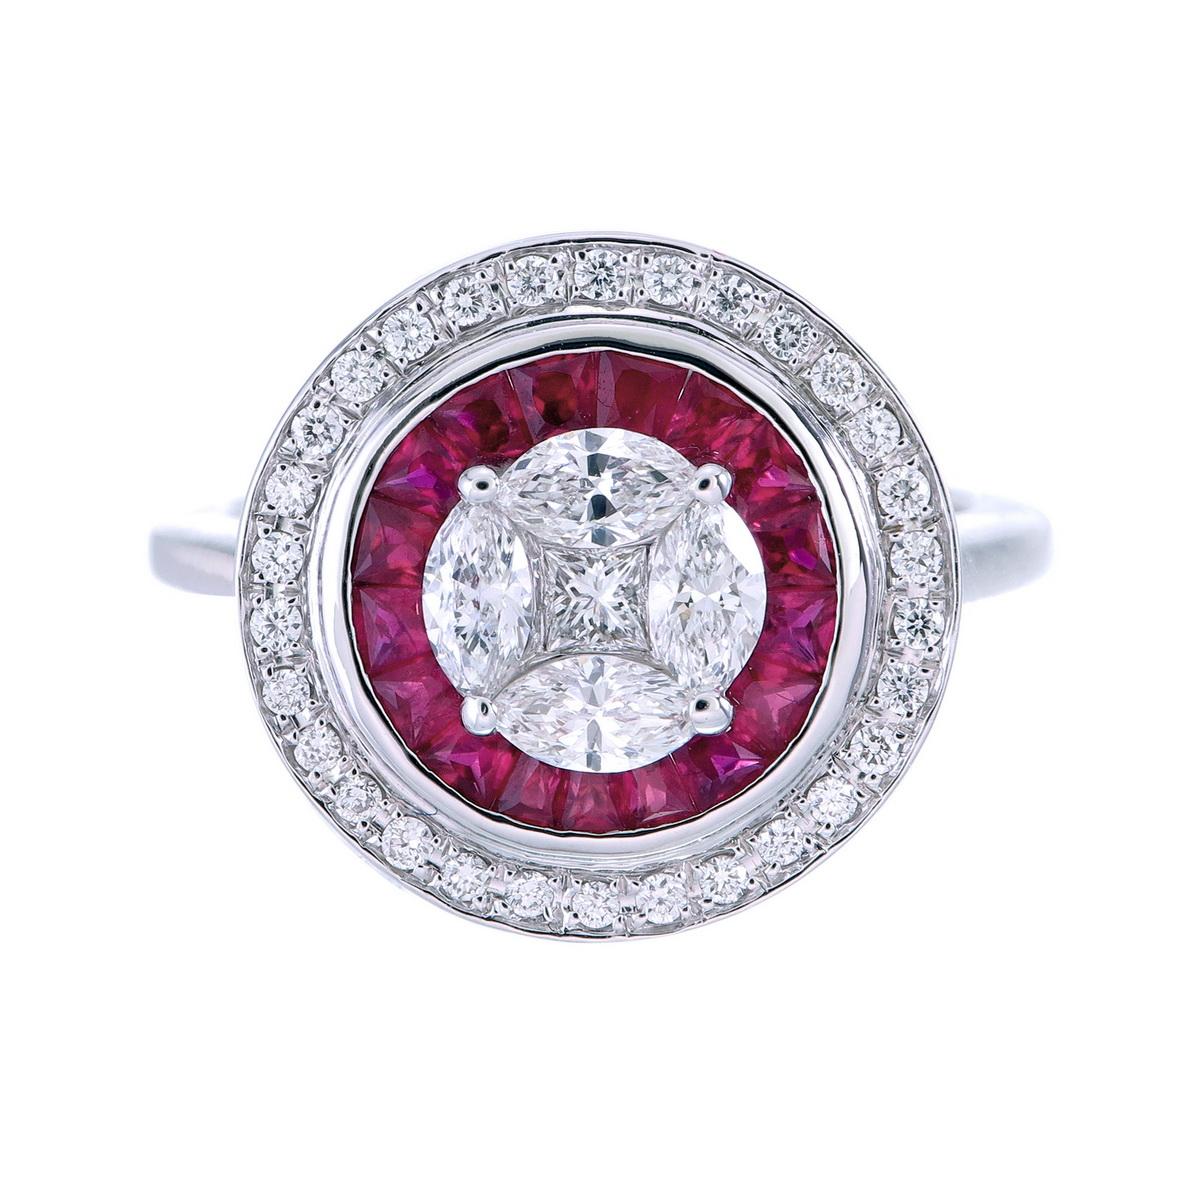 Circular design with Natural Ruby & diamond halo ring.

This incredible Diamonds engagement ring features a 0.70 ct diamonds  (G VS), surrounded by a beautiful halo of 0.64ct total weight of rubies which are customized & invisible set without any